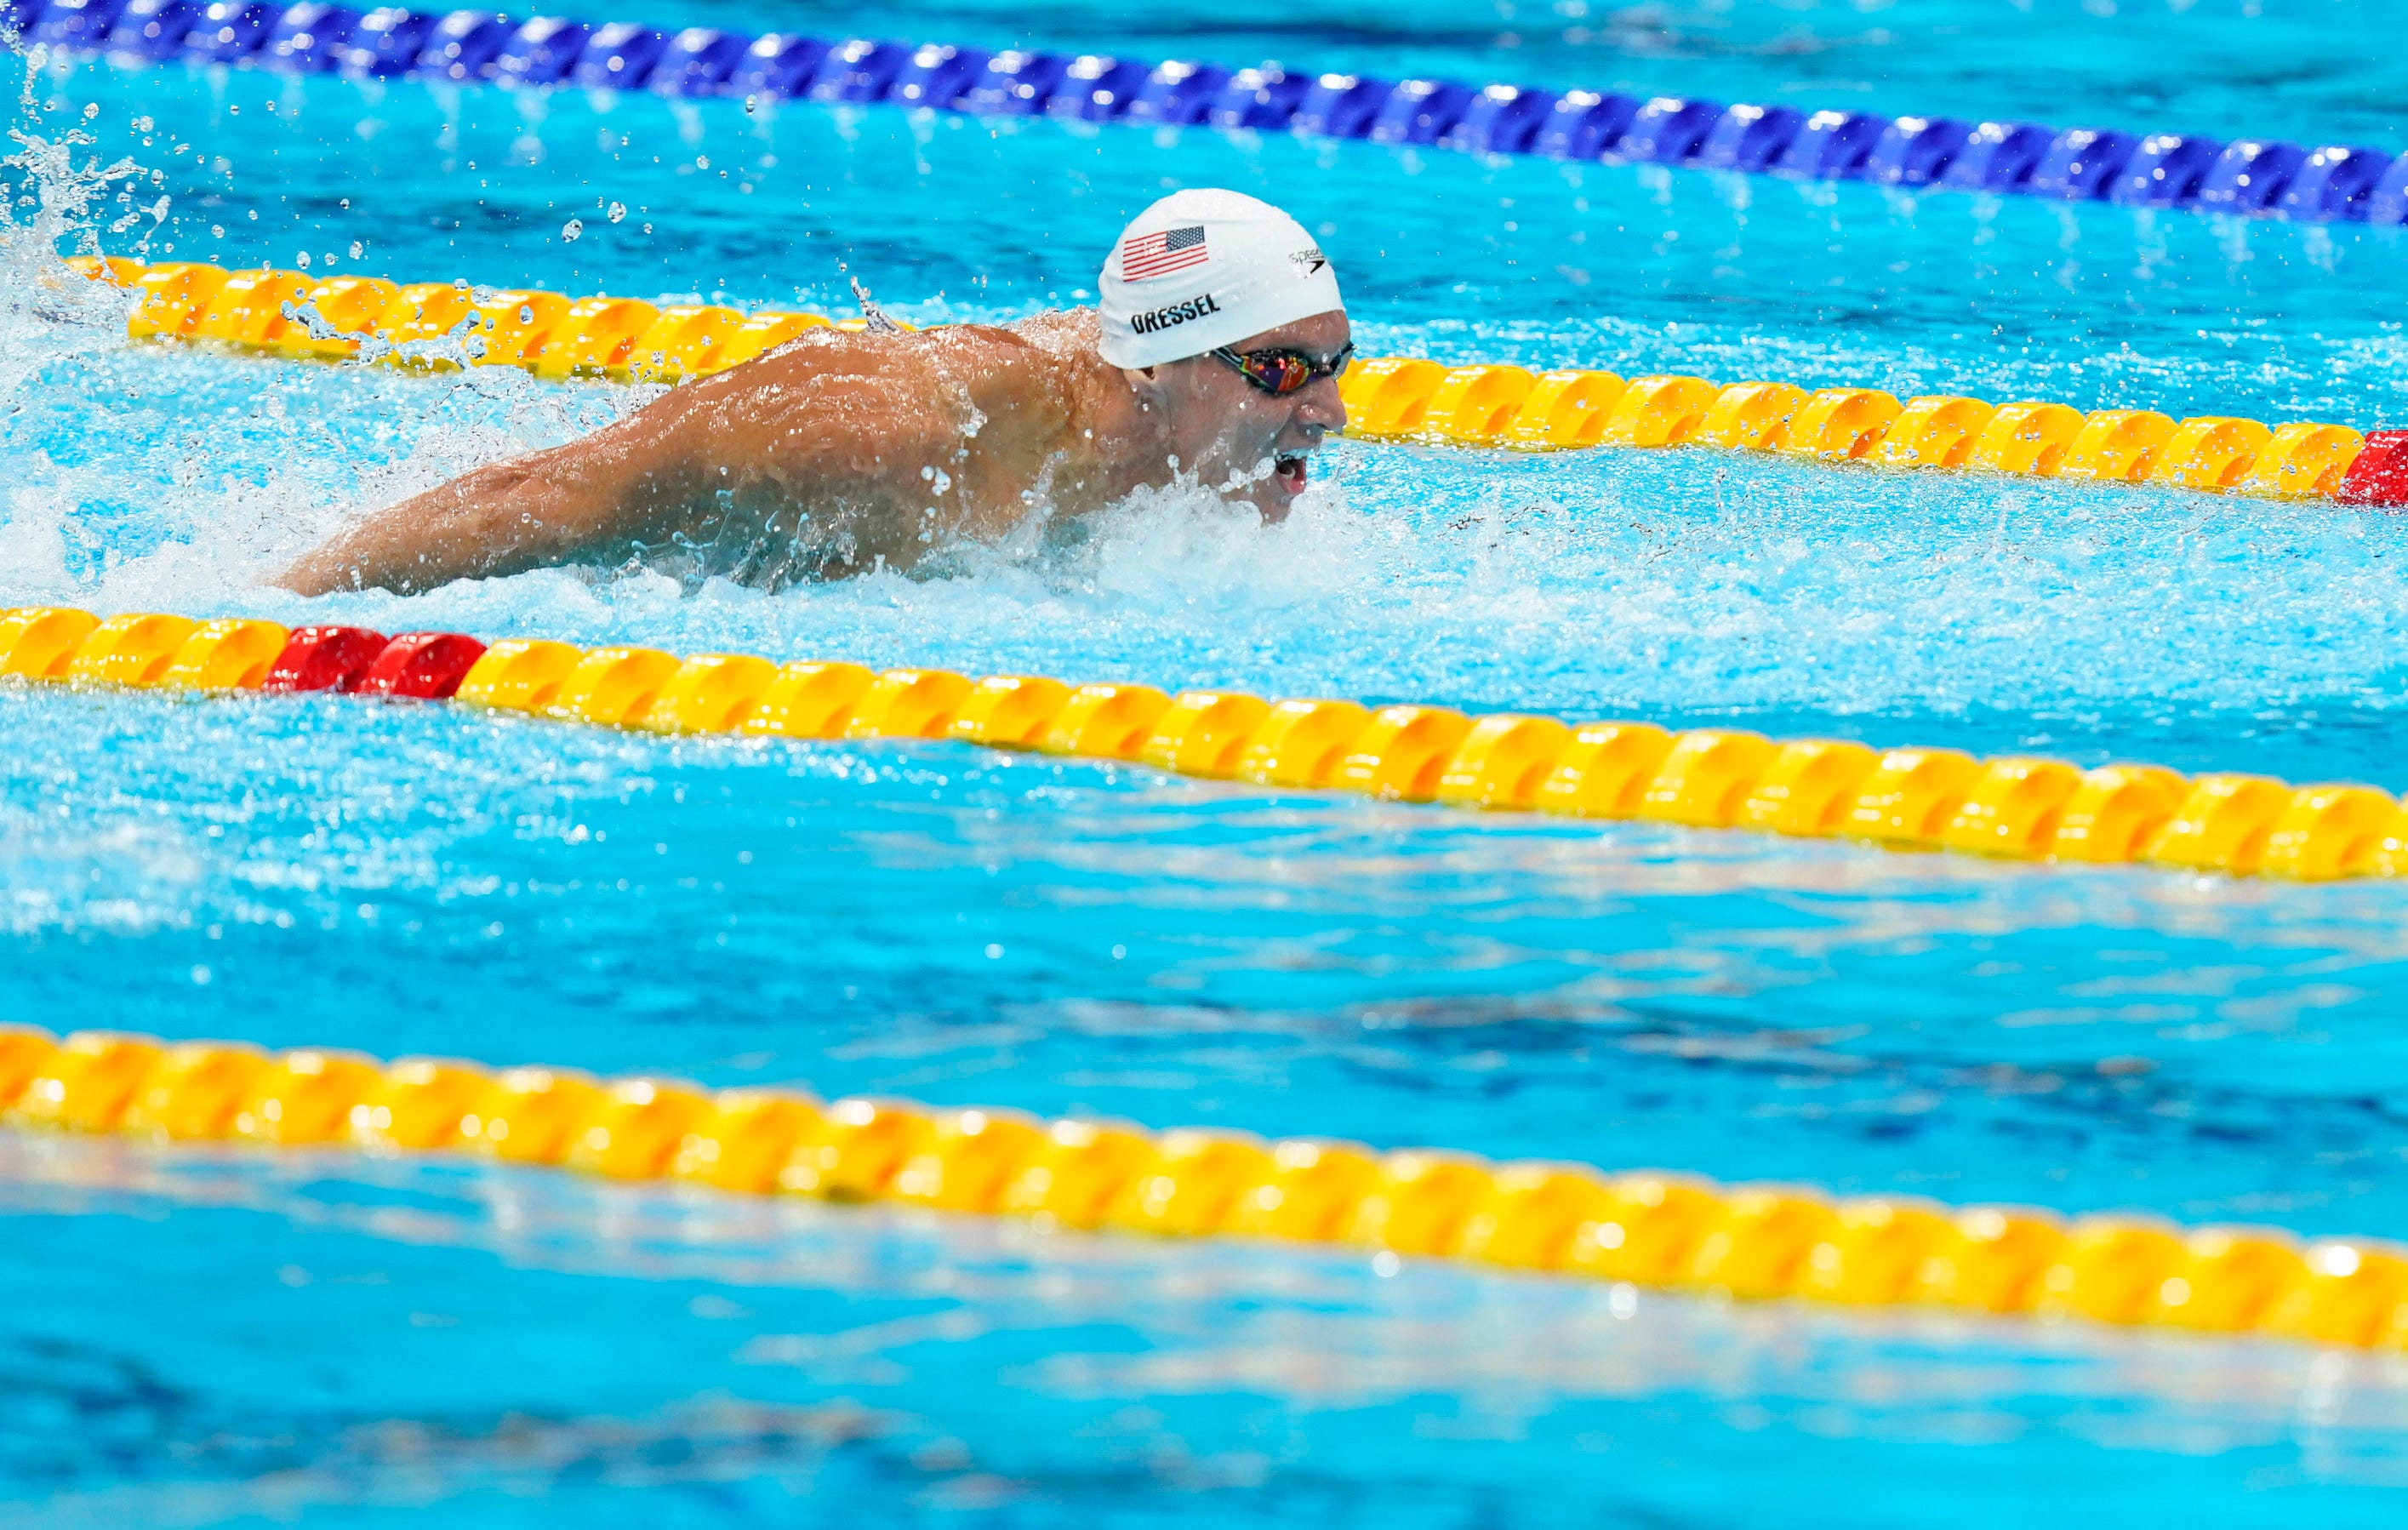 Caeleb Dressel (USA) races the men's 100m butterfly heats during the Tokyo 2020 Olympic Summer Games at Tokyo Aquatics Centre on July 29, 2021. Mandatory Credit: Grace Hollars-USA TODAY Sports